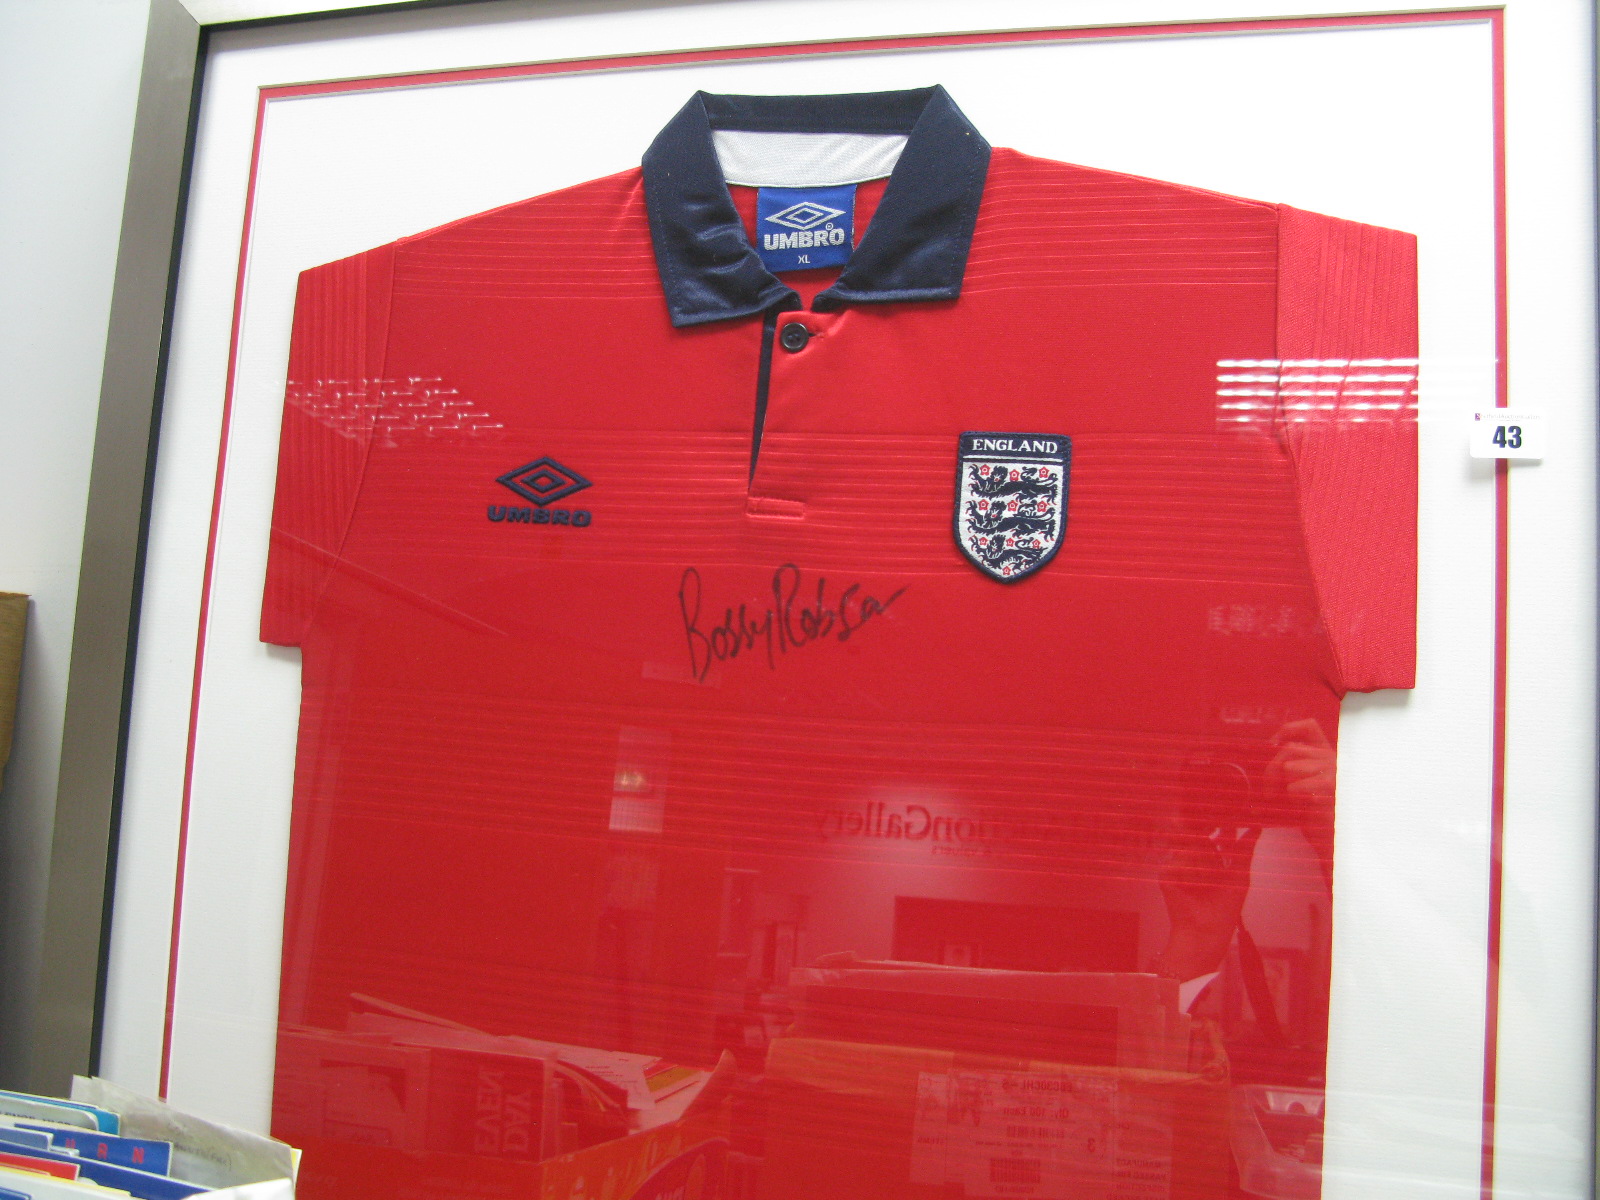 Bobby Robson, black pen autograph (unverified) on a Umbro England red away shirt, mounted glazed and